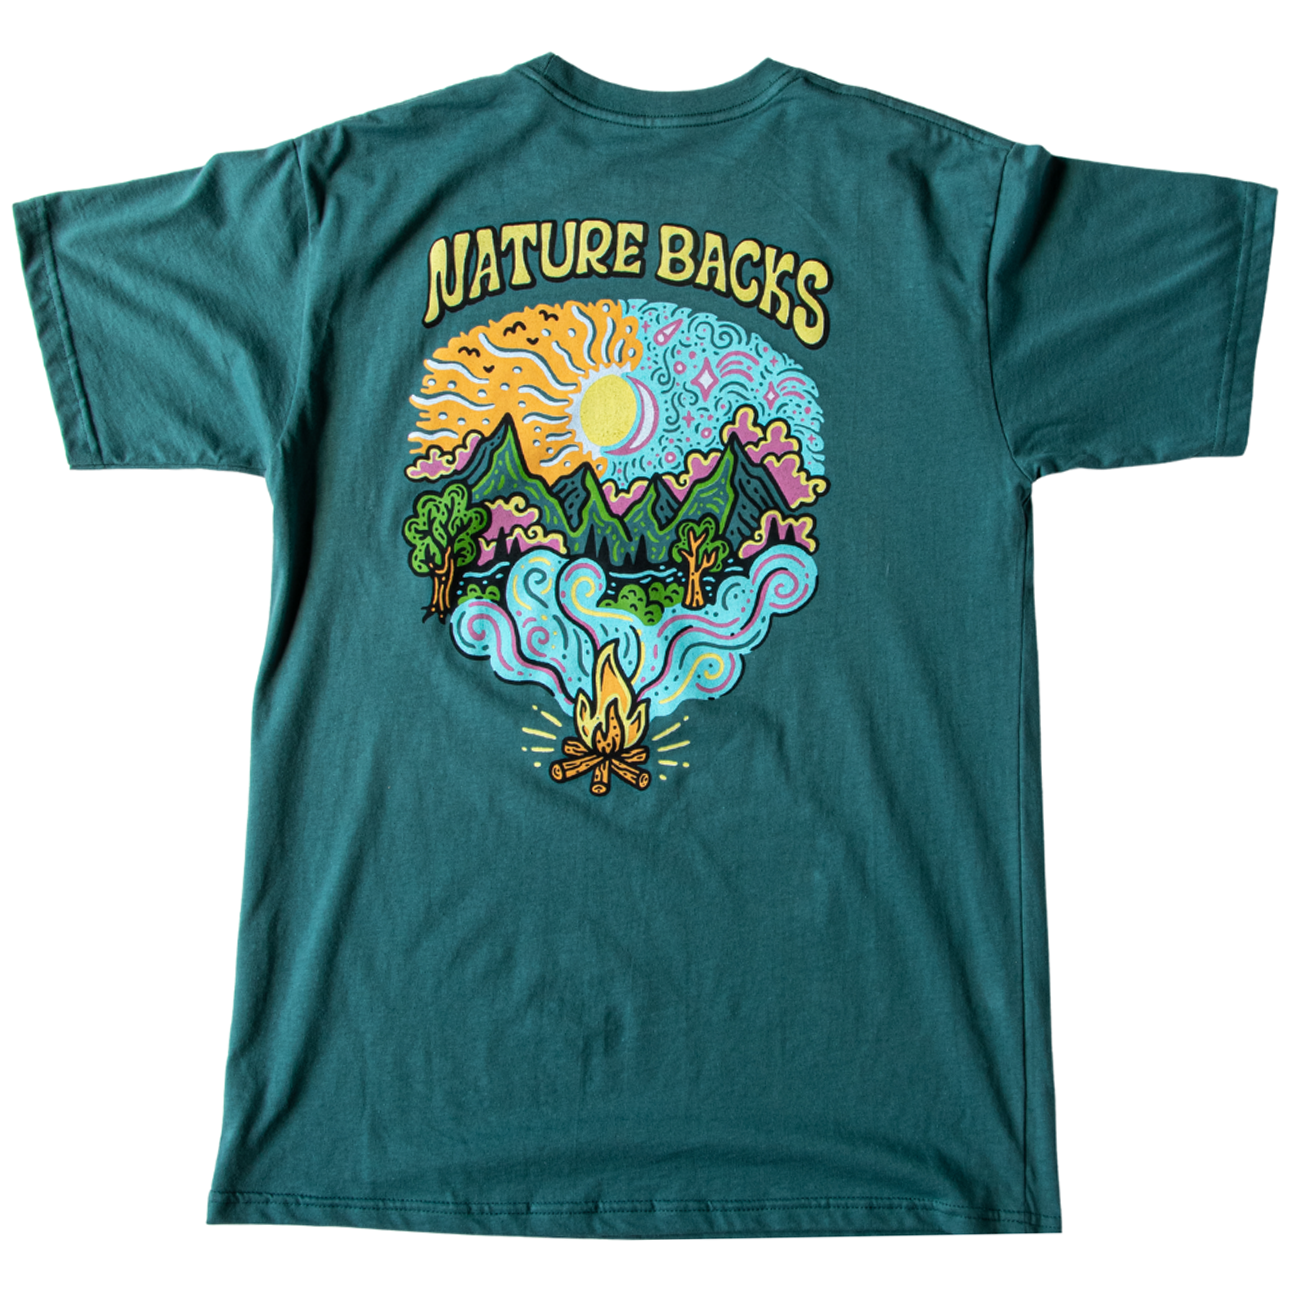 Nature Backs Limited Edition Short Sleeve 100% Organic Cotton T-Shirt | Limited Ember Spruce Short Sleeve made with Eco-Friendly Fibers Sustainably made in the USA 